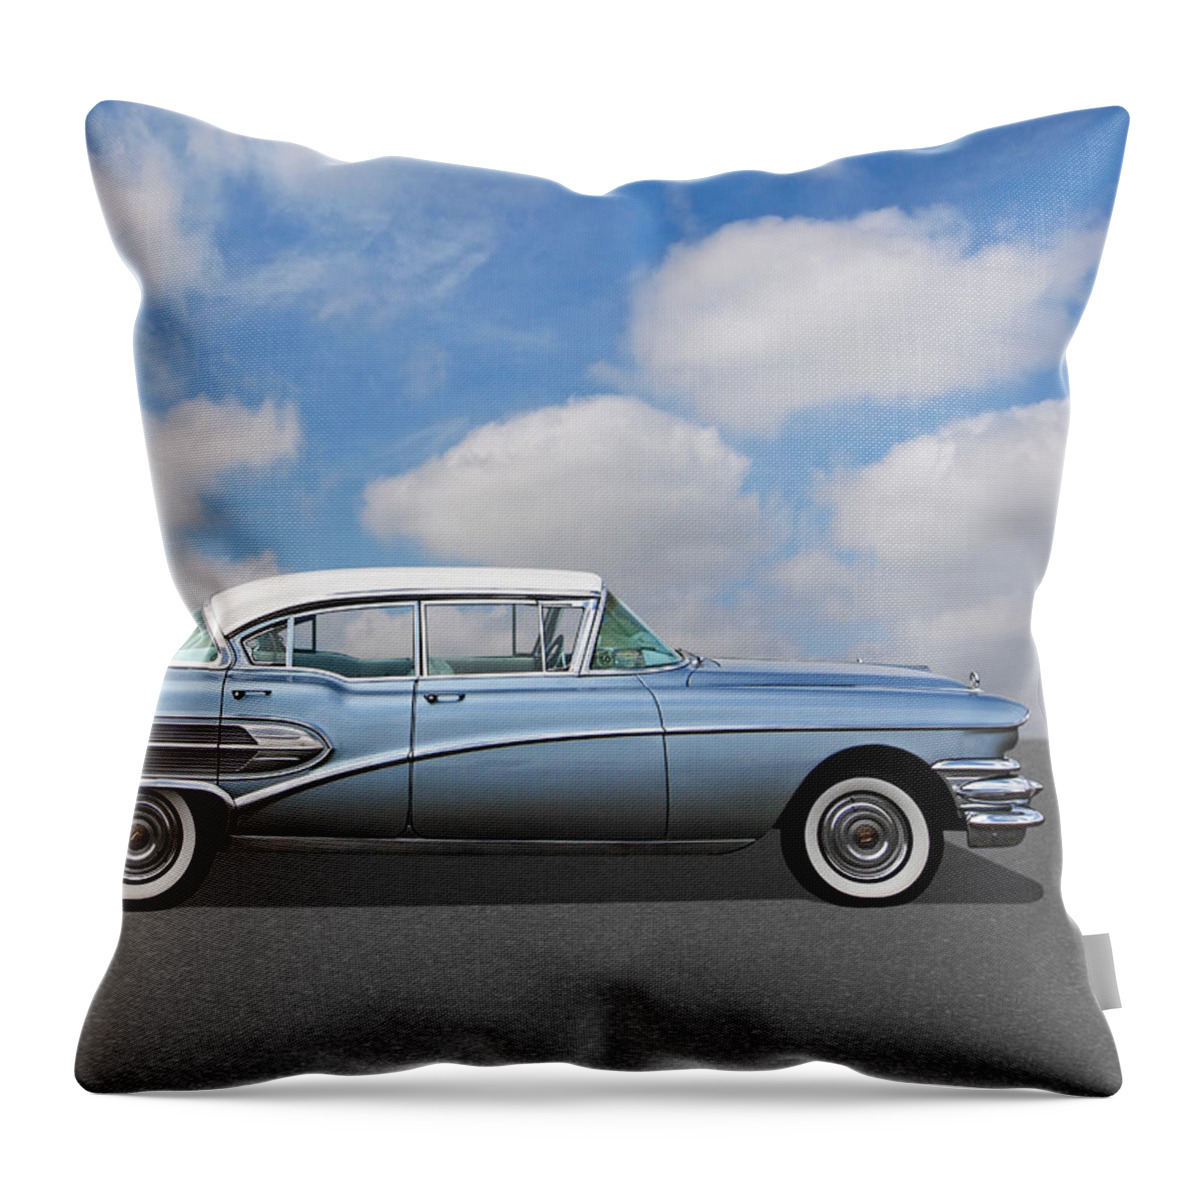 1958 Buick Throw Pillow featuring the photograph 1958 Buick Roadmaster 75 by Gill Billington